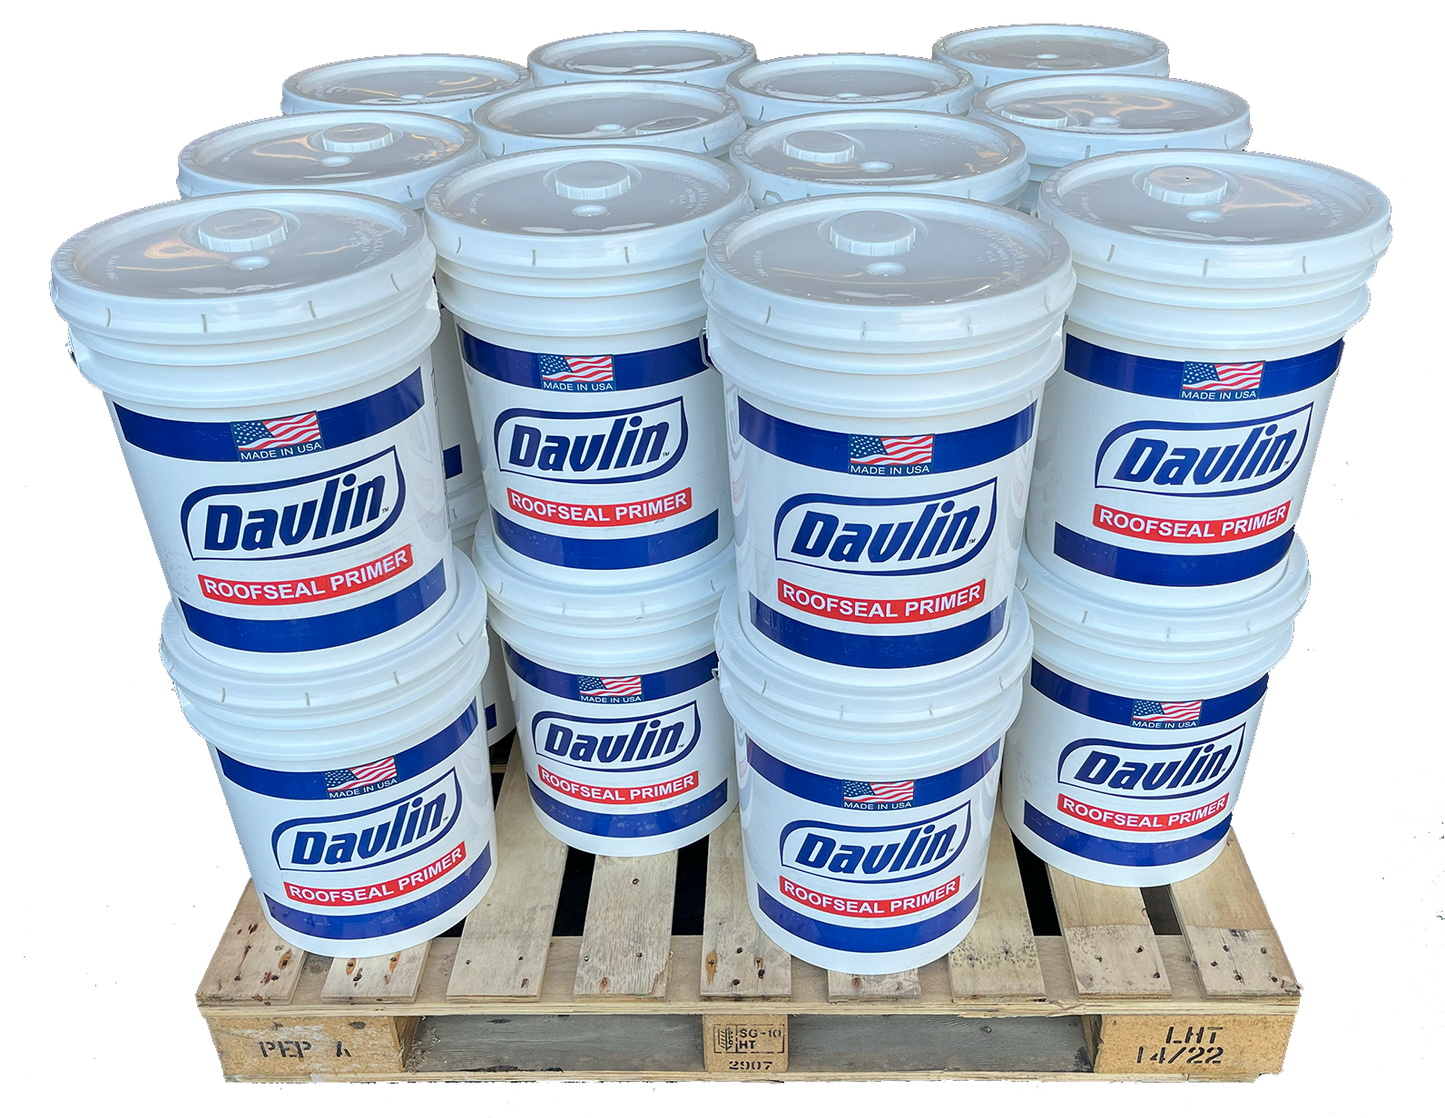 Roof Sealant In Bulk - 55 gal Drum - Roof Primer - Roofseal Bleed Blocking Primer - 100% Acrylic - Free Shipping - Free Sample